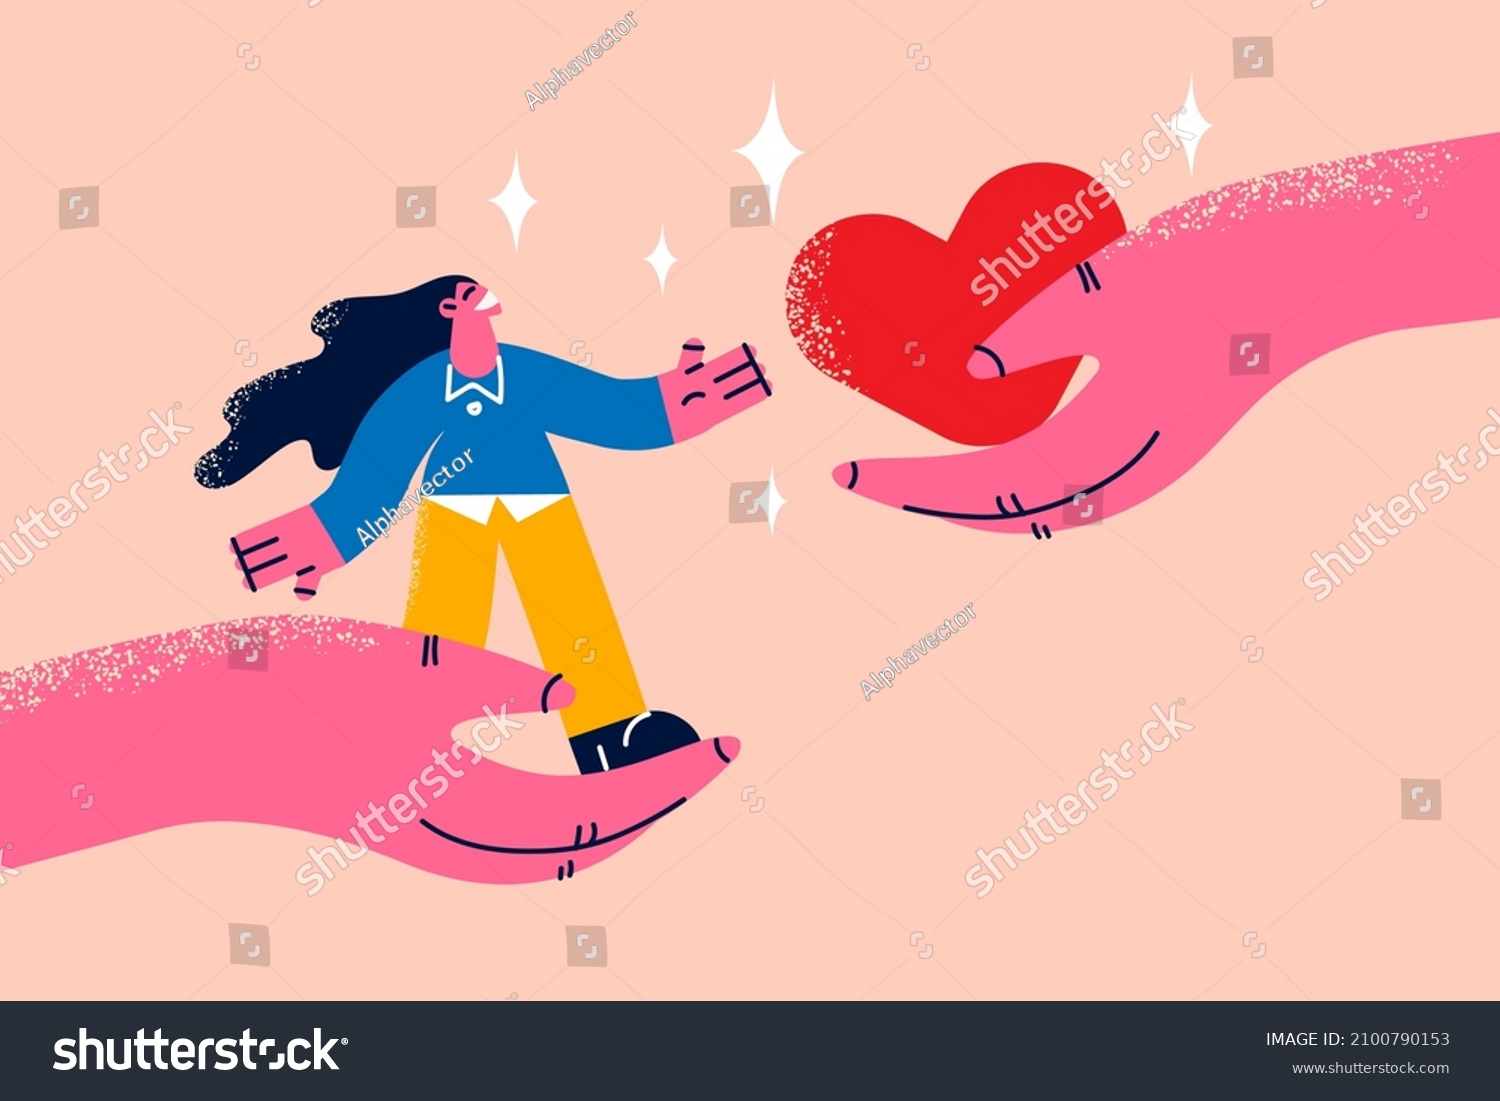 SVG of Hand with woman and heart shape. Concept of support and kindness in community. Female volunteer share empathy and hope with needy. Help and compassion in life. Flat vector illustration.  svg